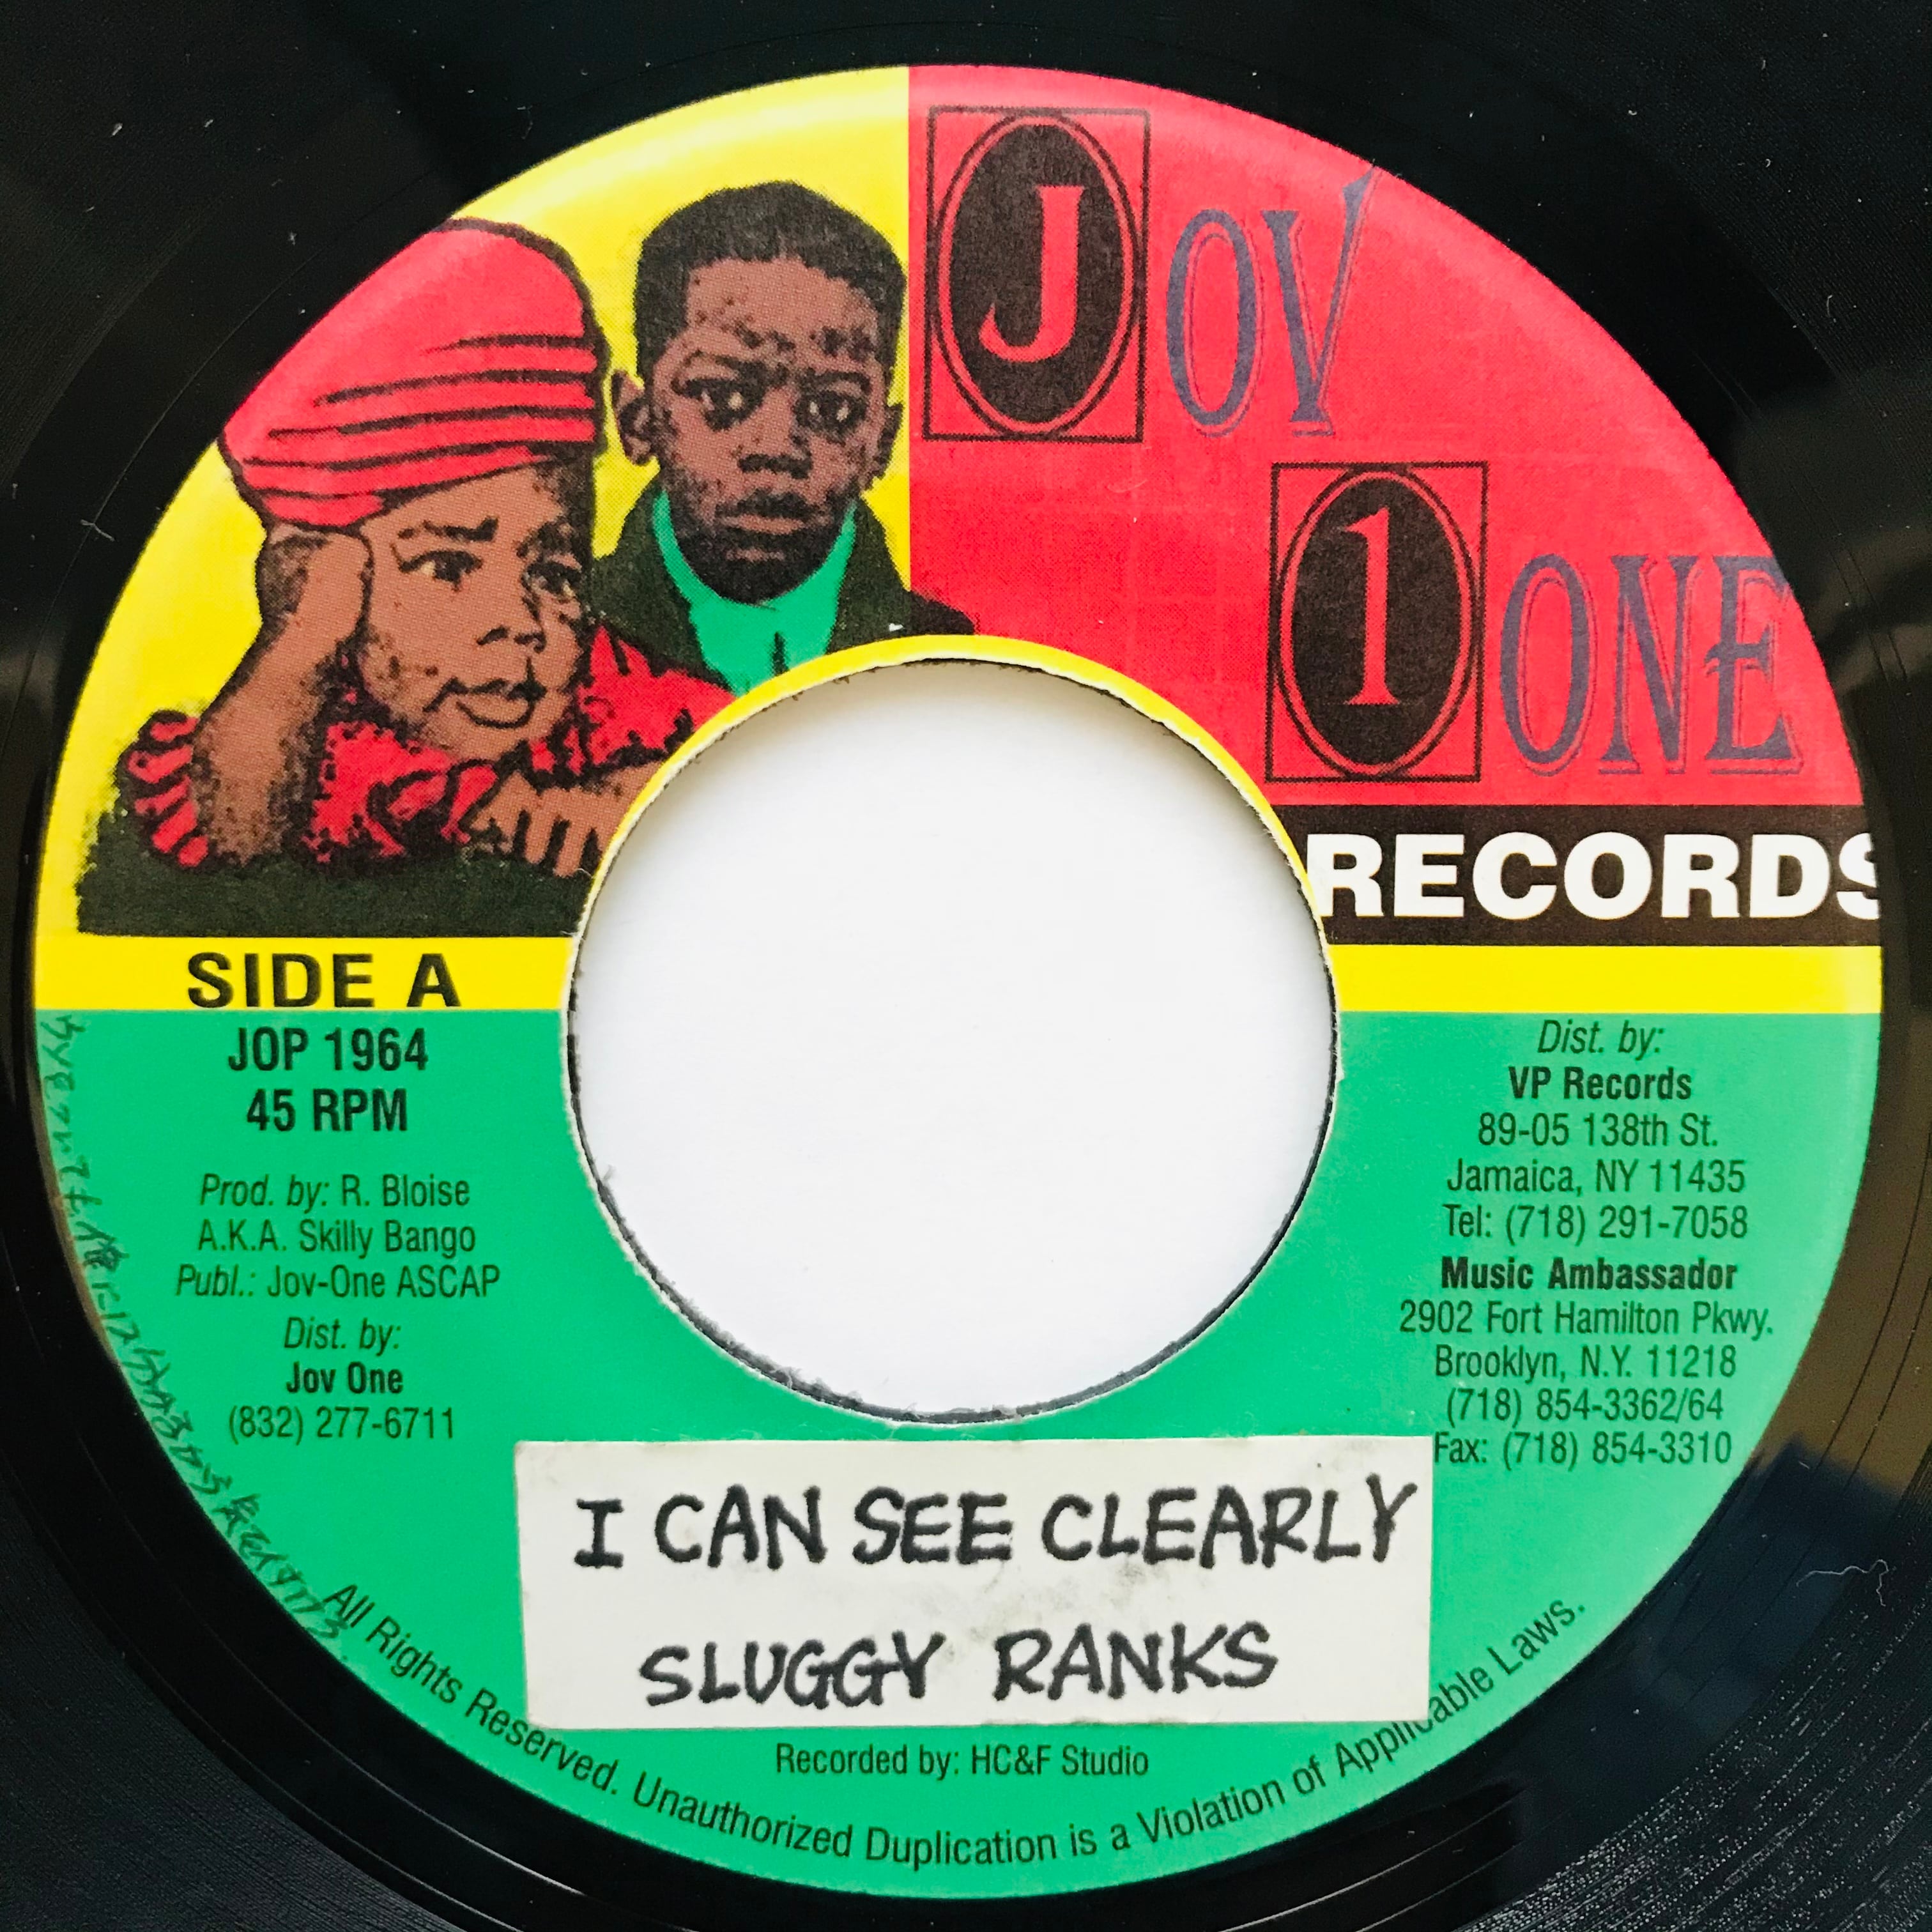 Sluggy Ranks - I Can See Clearly【7-11035】